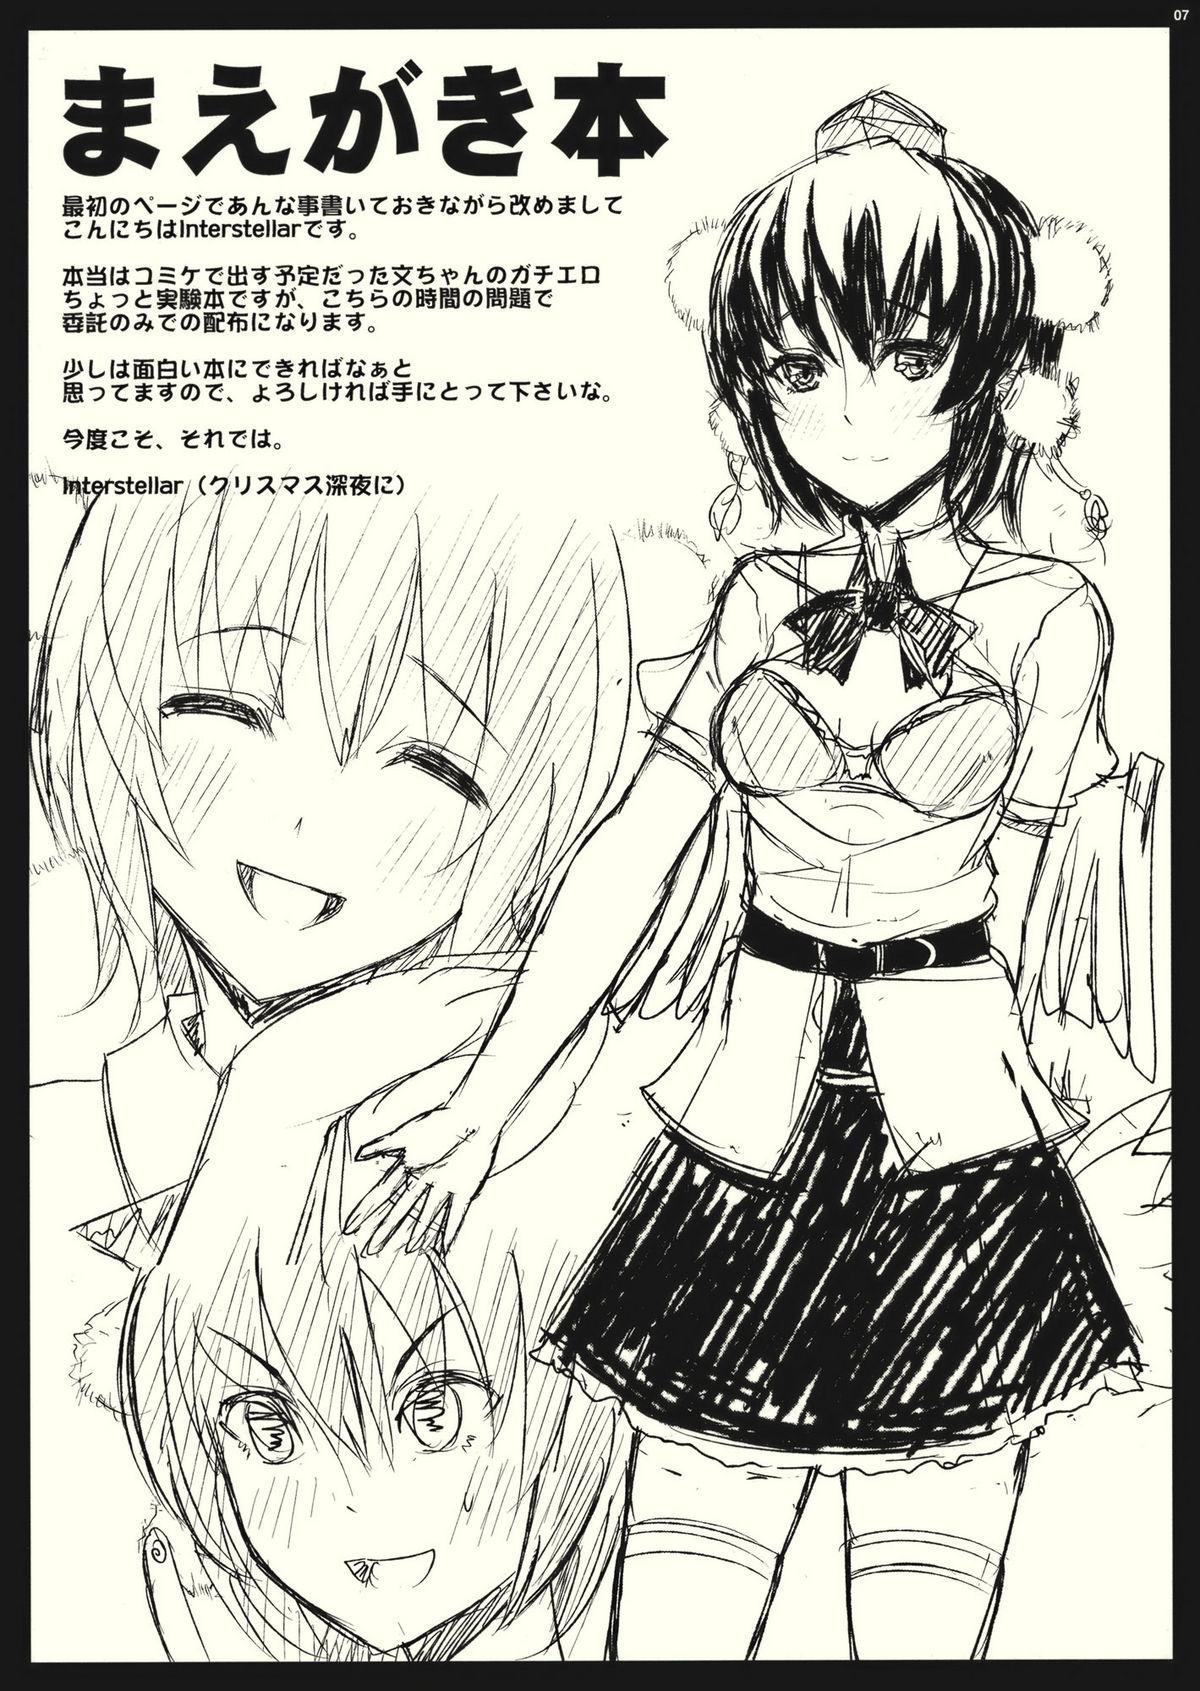 Slapping Atogaki Hon - Touhou project Teenager - Page 7